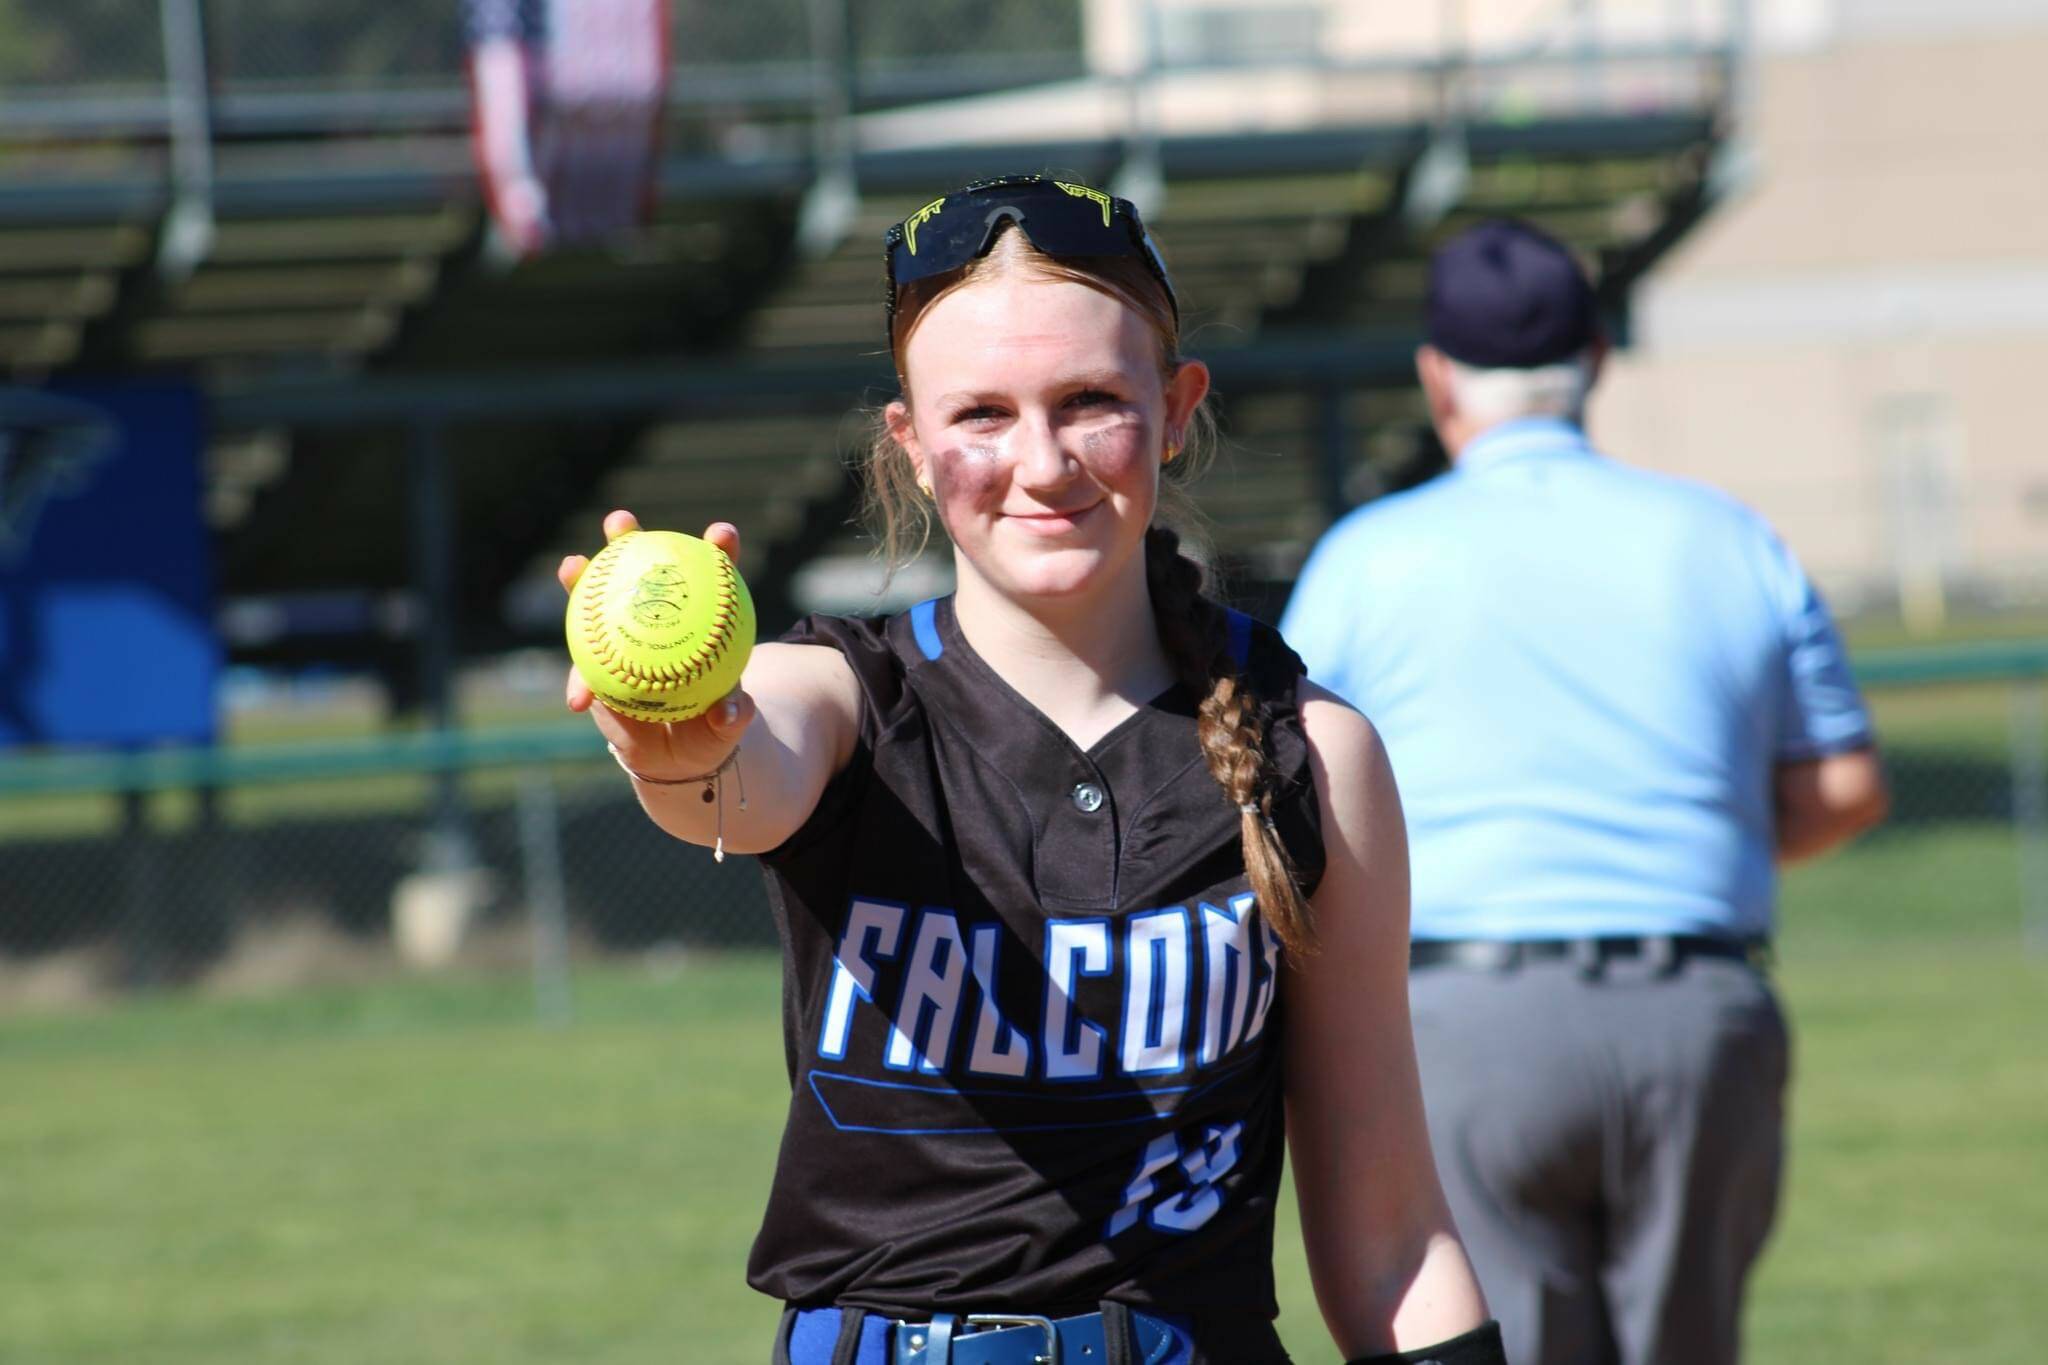 South Whidbey eighth grader Lena Heggenes shows off her homerun ball she hit during a game March 16 against Evergreen of Seattle. South Whidbey won 14-2. Photo courtesy Keasha Campbell.